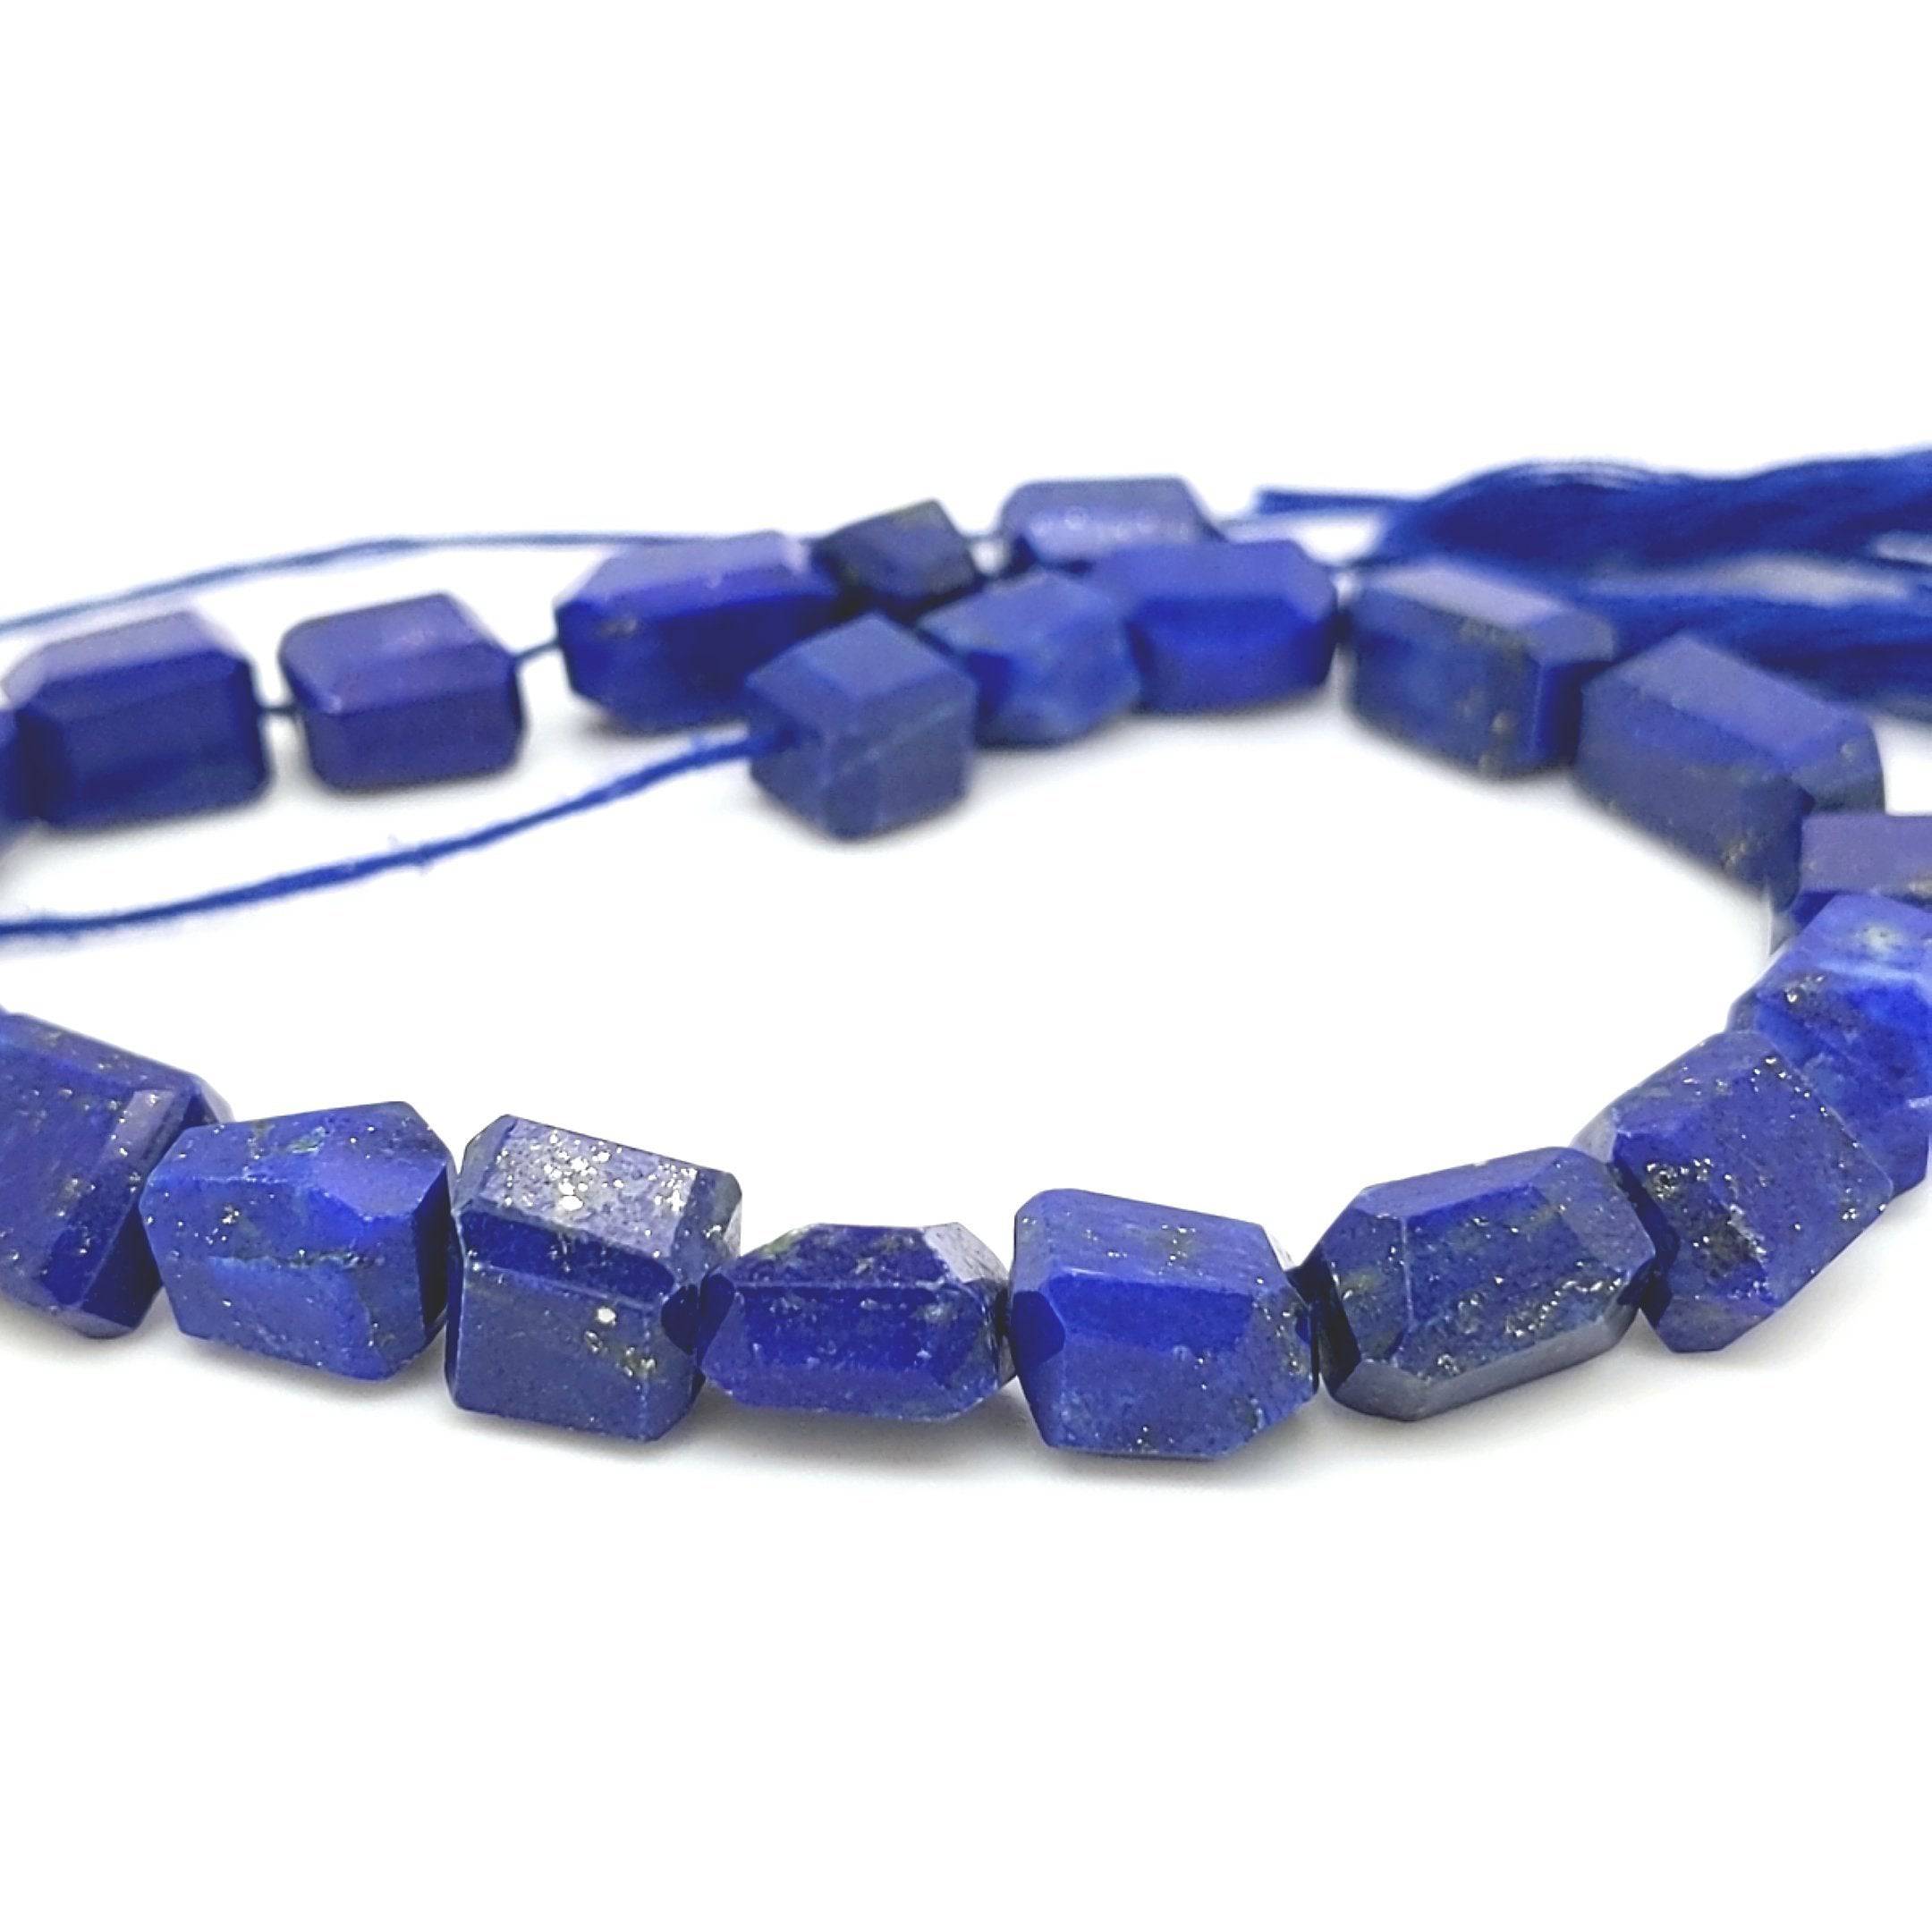 Natural Lapis Lazuli Beads From Afghanistan | Rectangular faceted | 12" Inches | Superior Quality - The LabradoriteKing